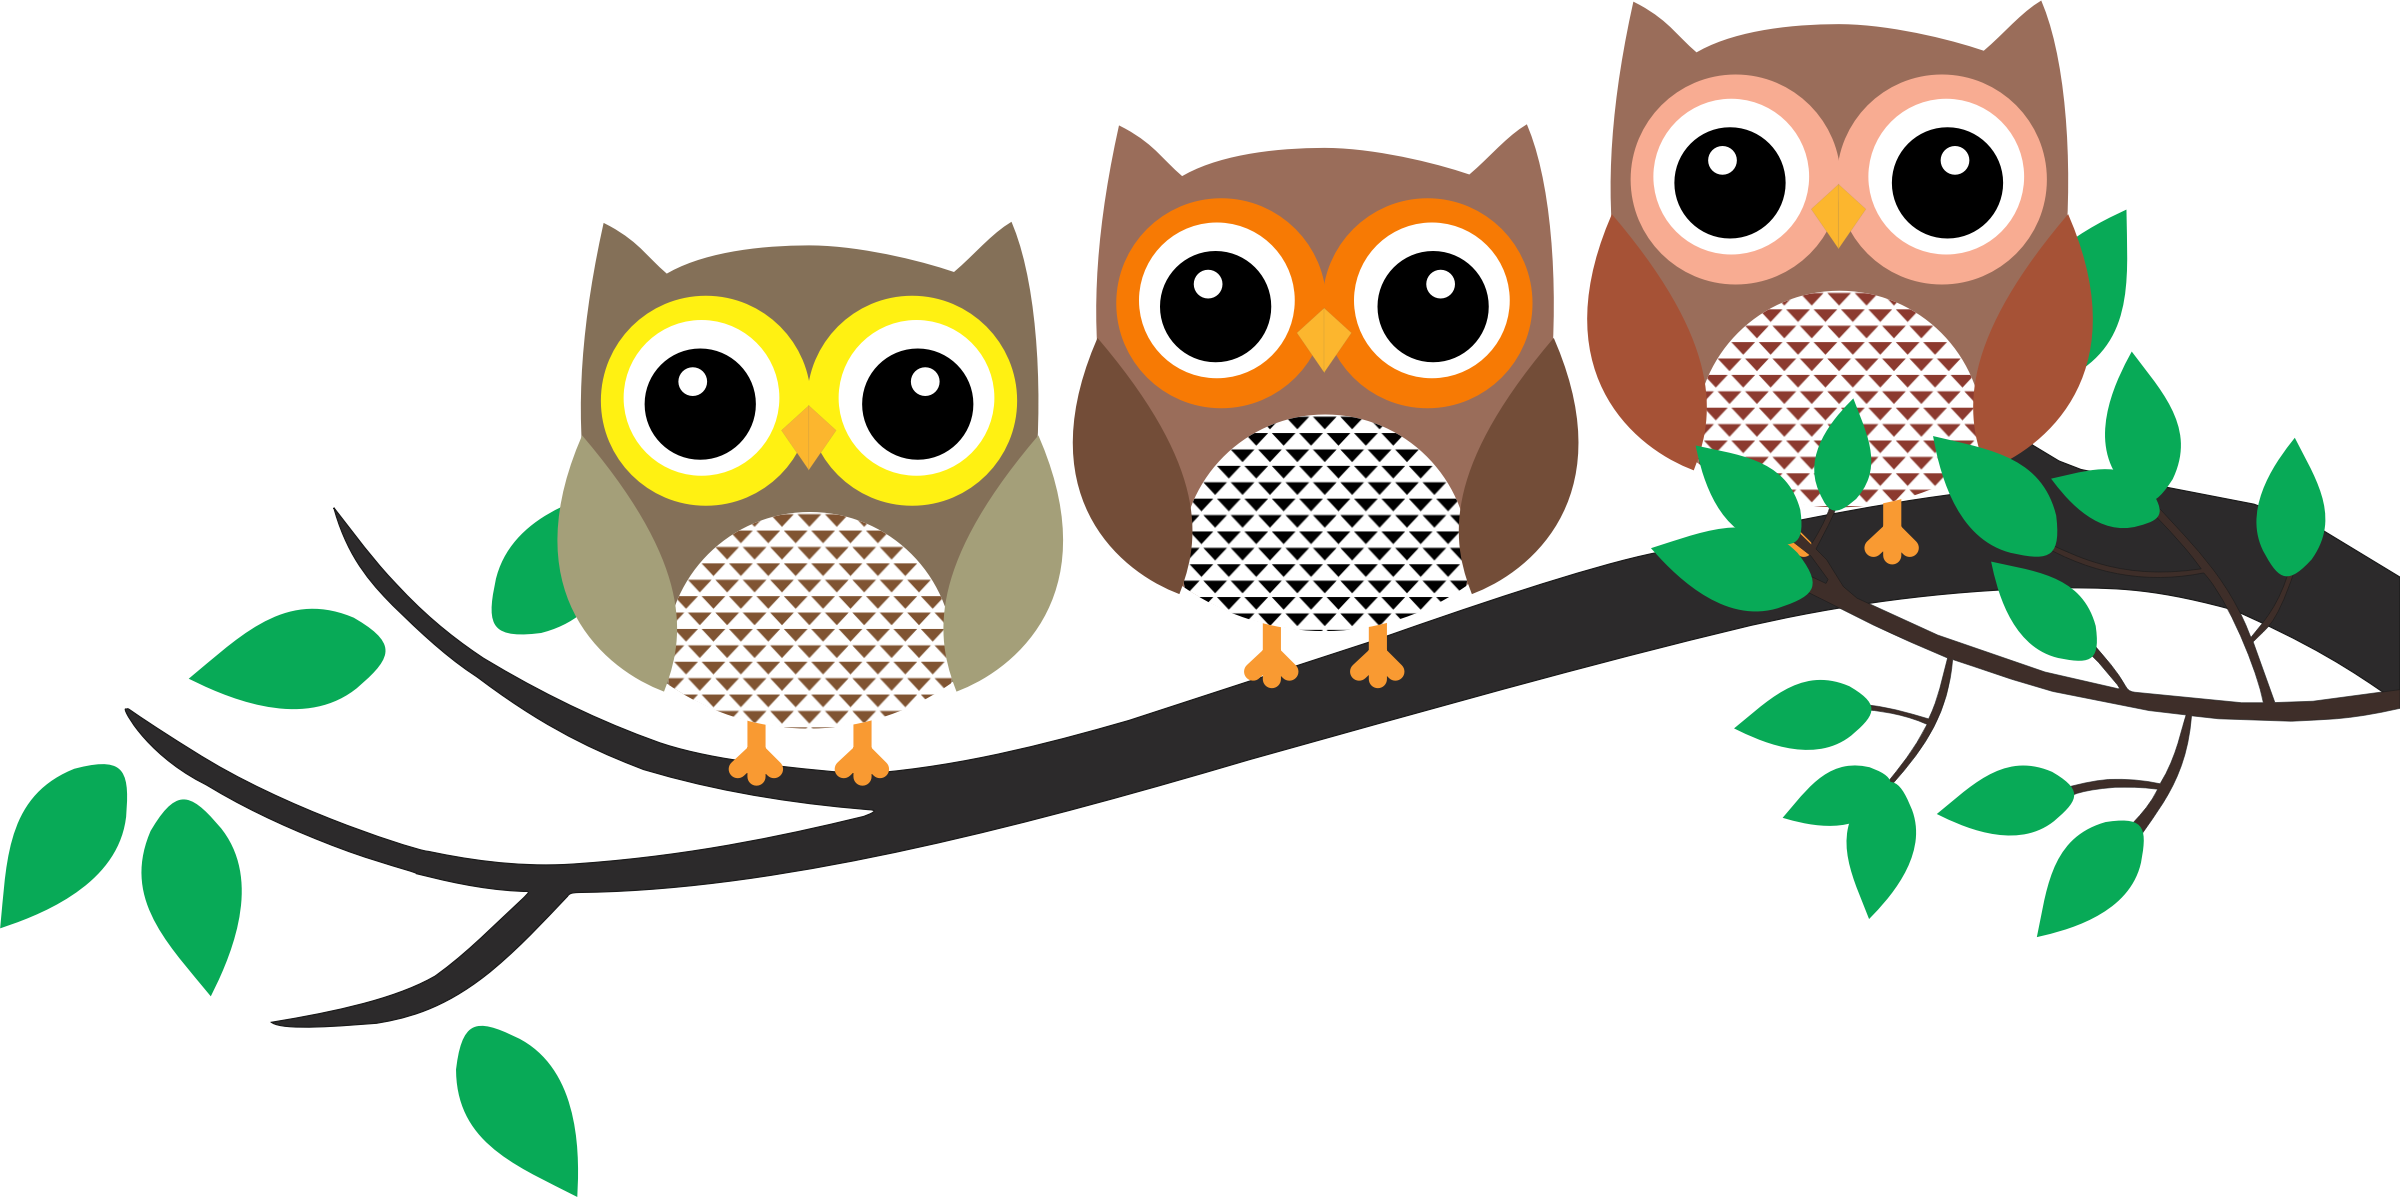 A Group Of Owls On A Branch